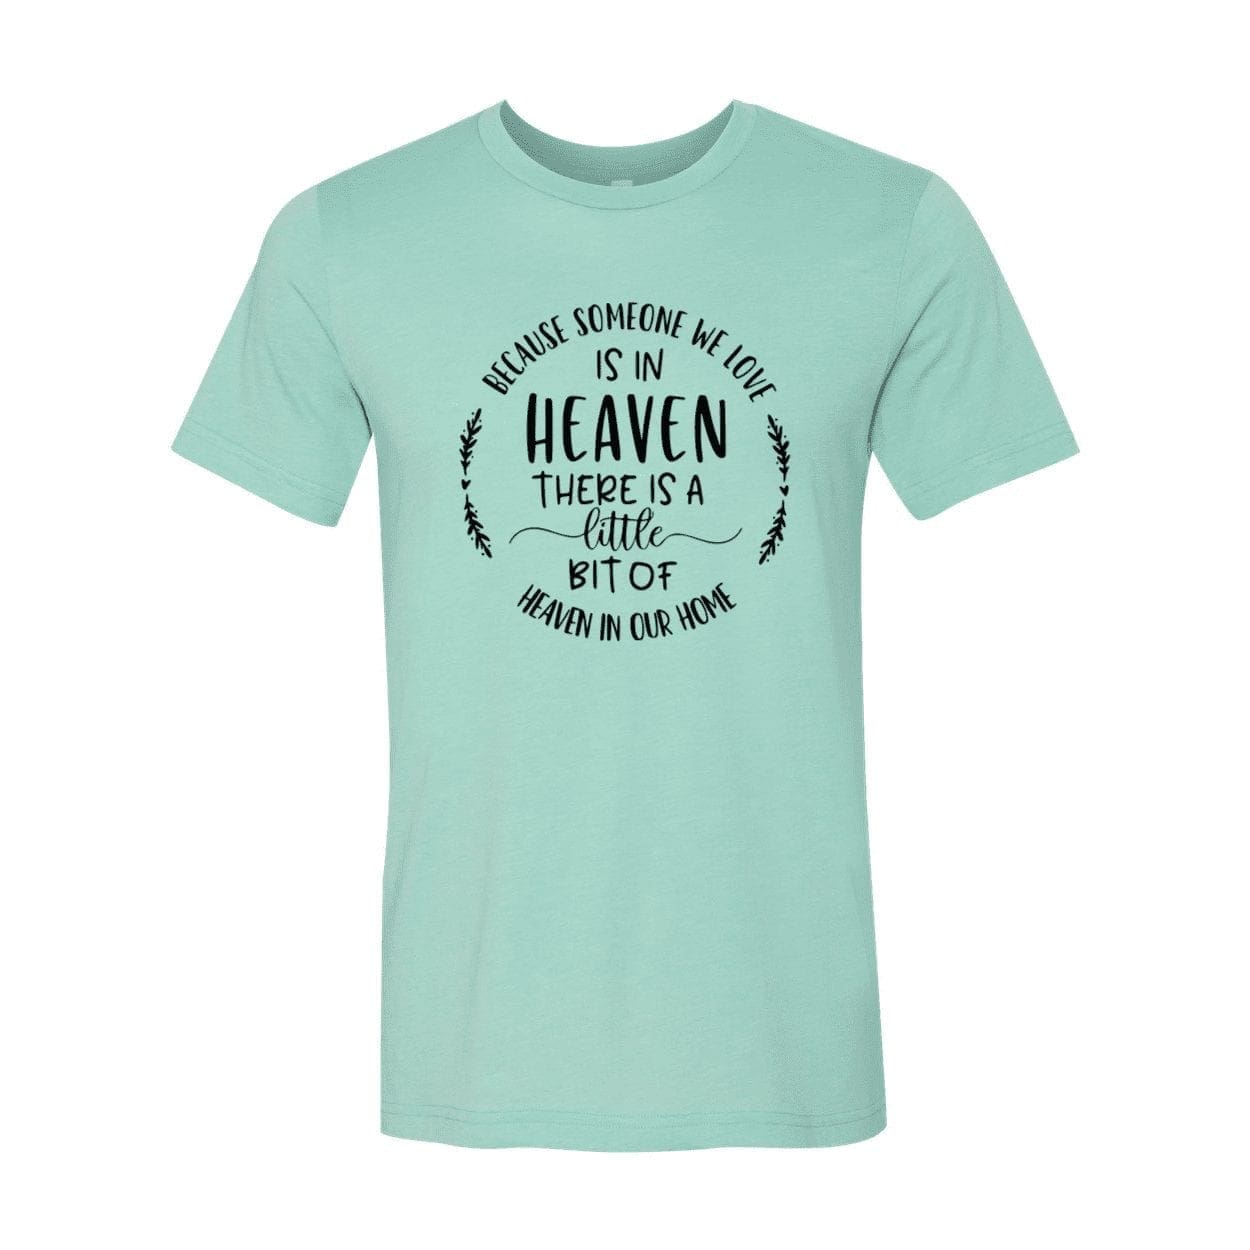 T-Shirts with sayings